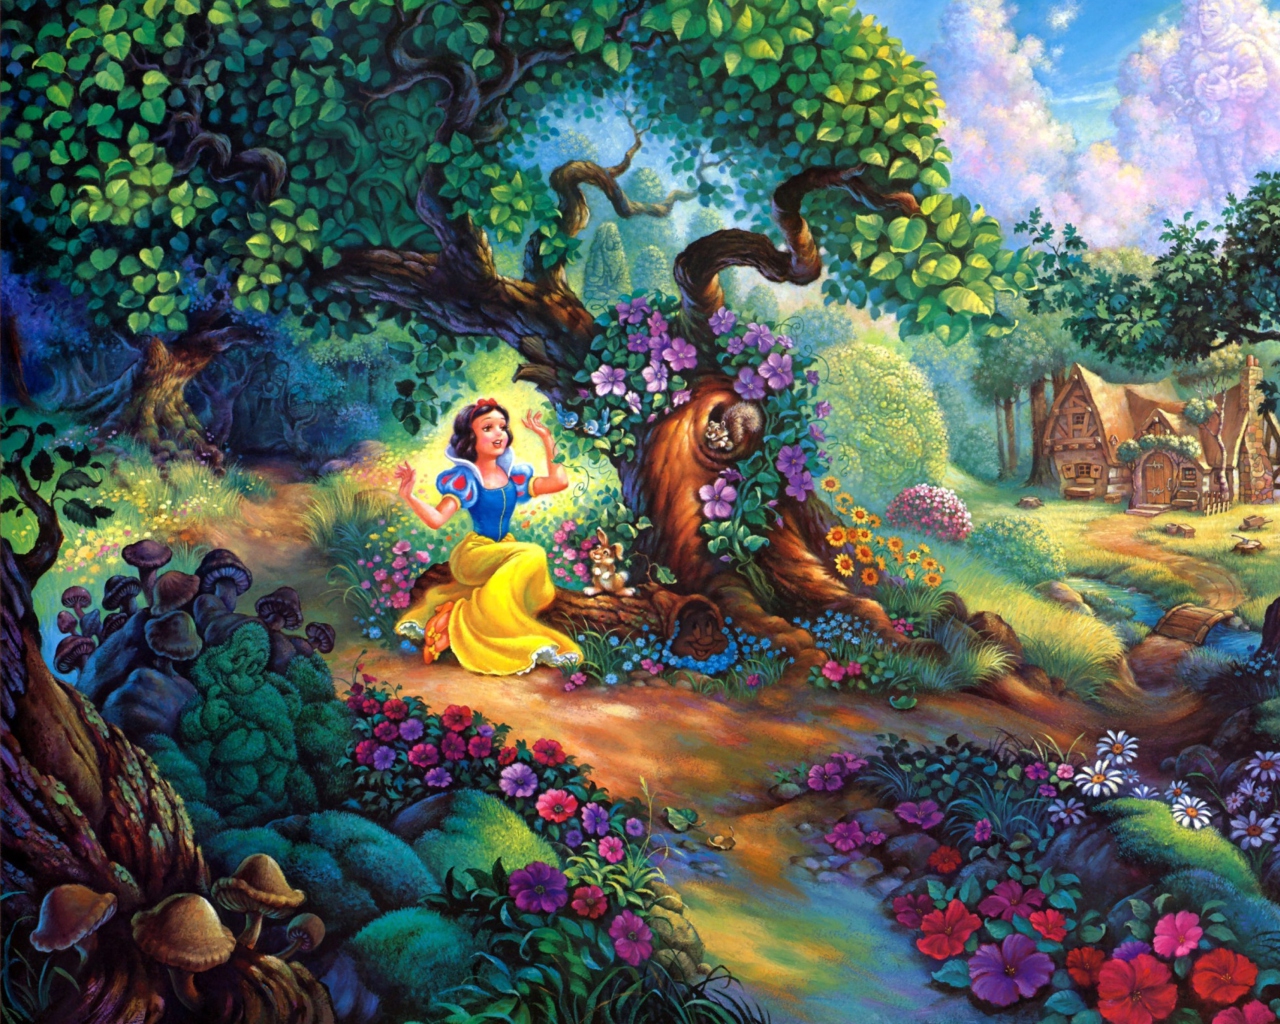 Snow White In Magical Forest wallpaper 1280x1024